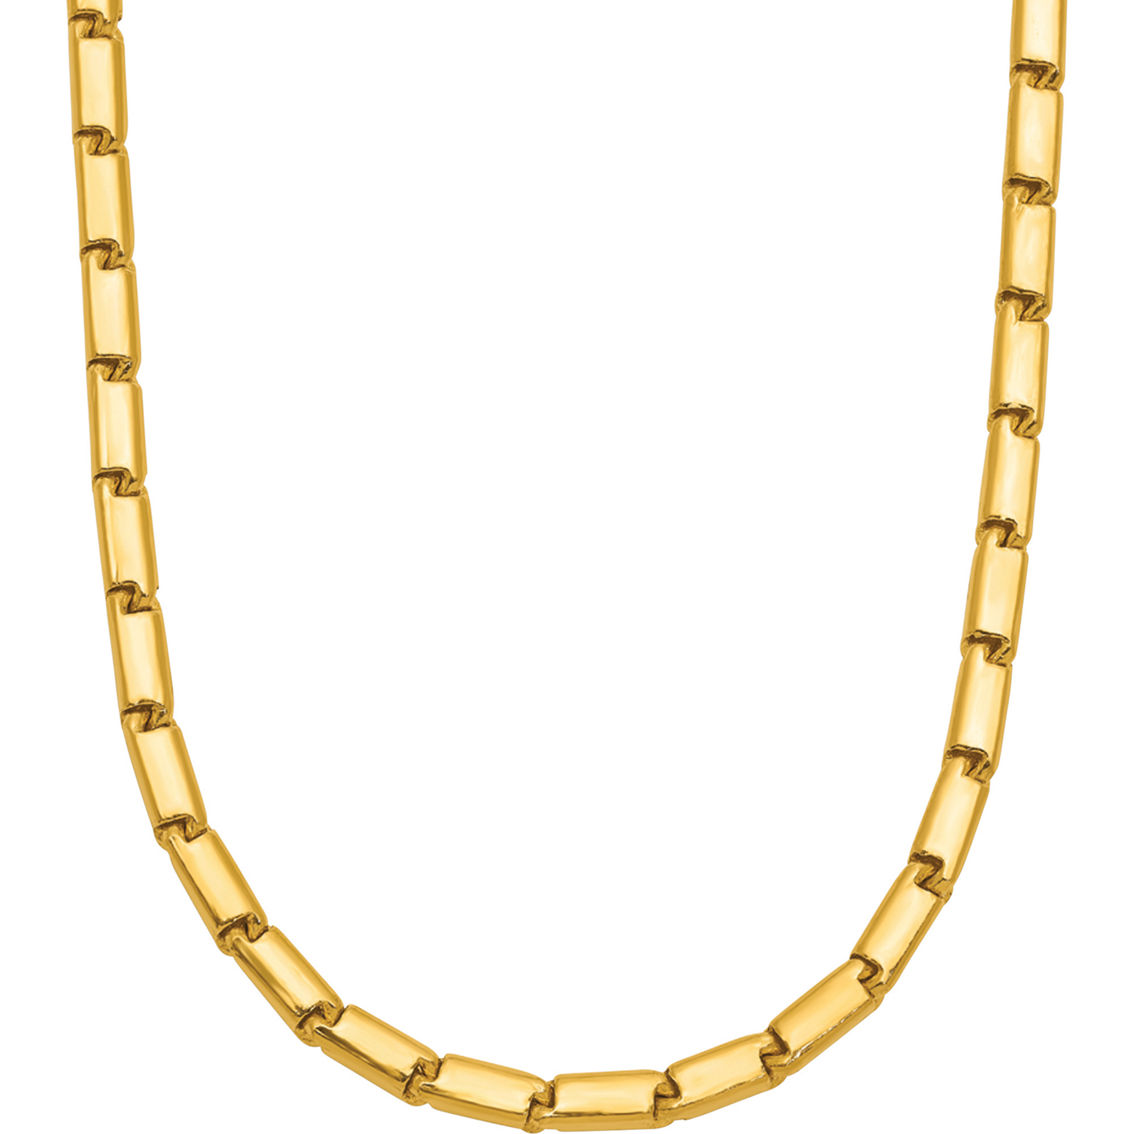 24K Pure Gold 24K Yellow Gold Solid Square 3mm Barrel Link 18 in. Chain - Image 2 of 5